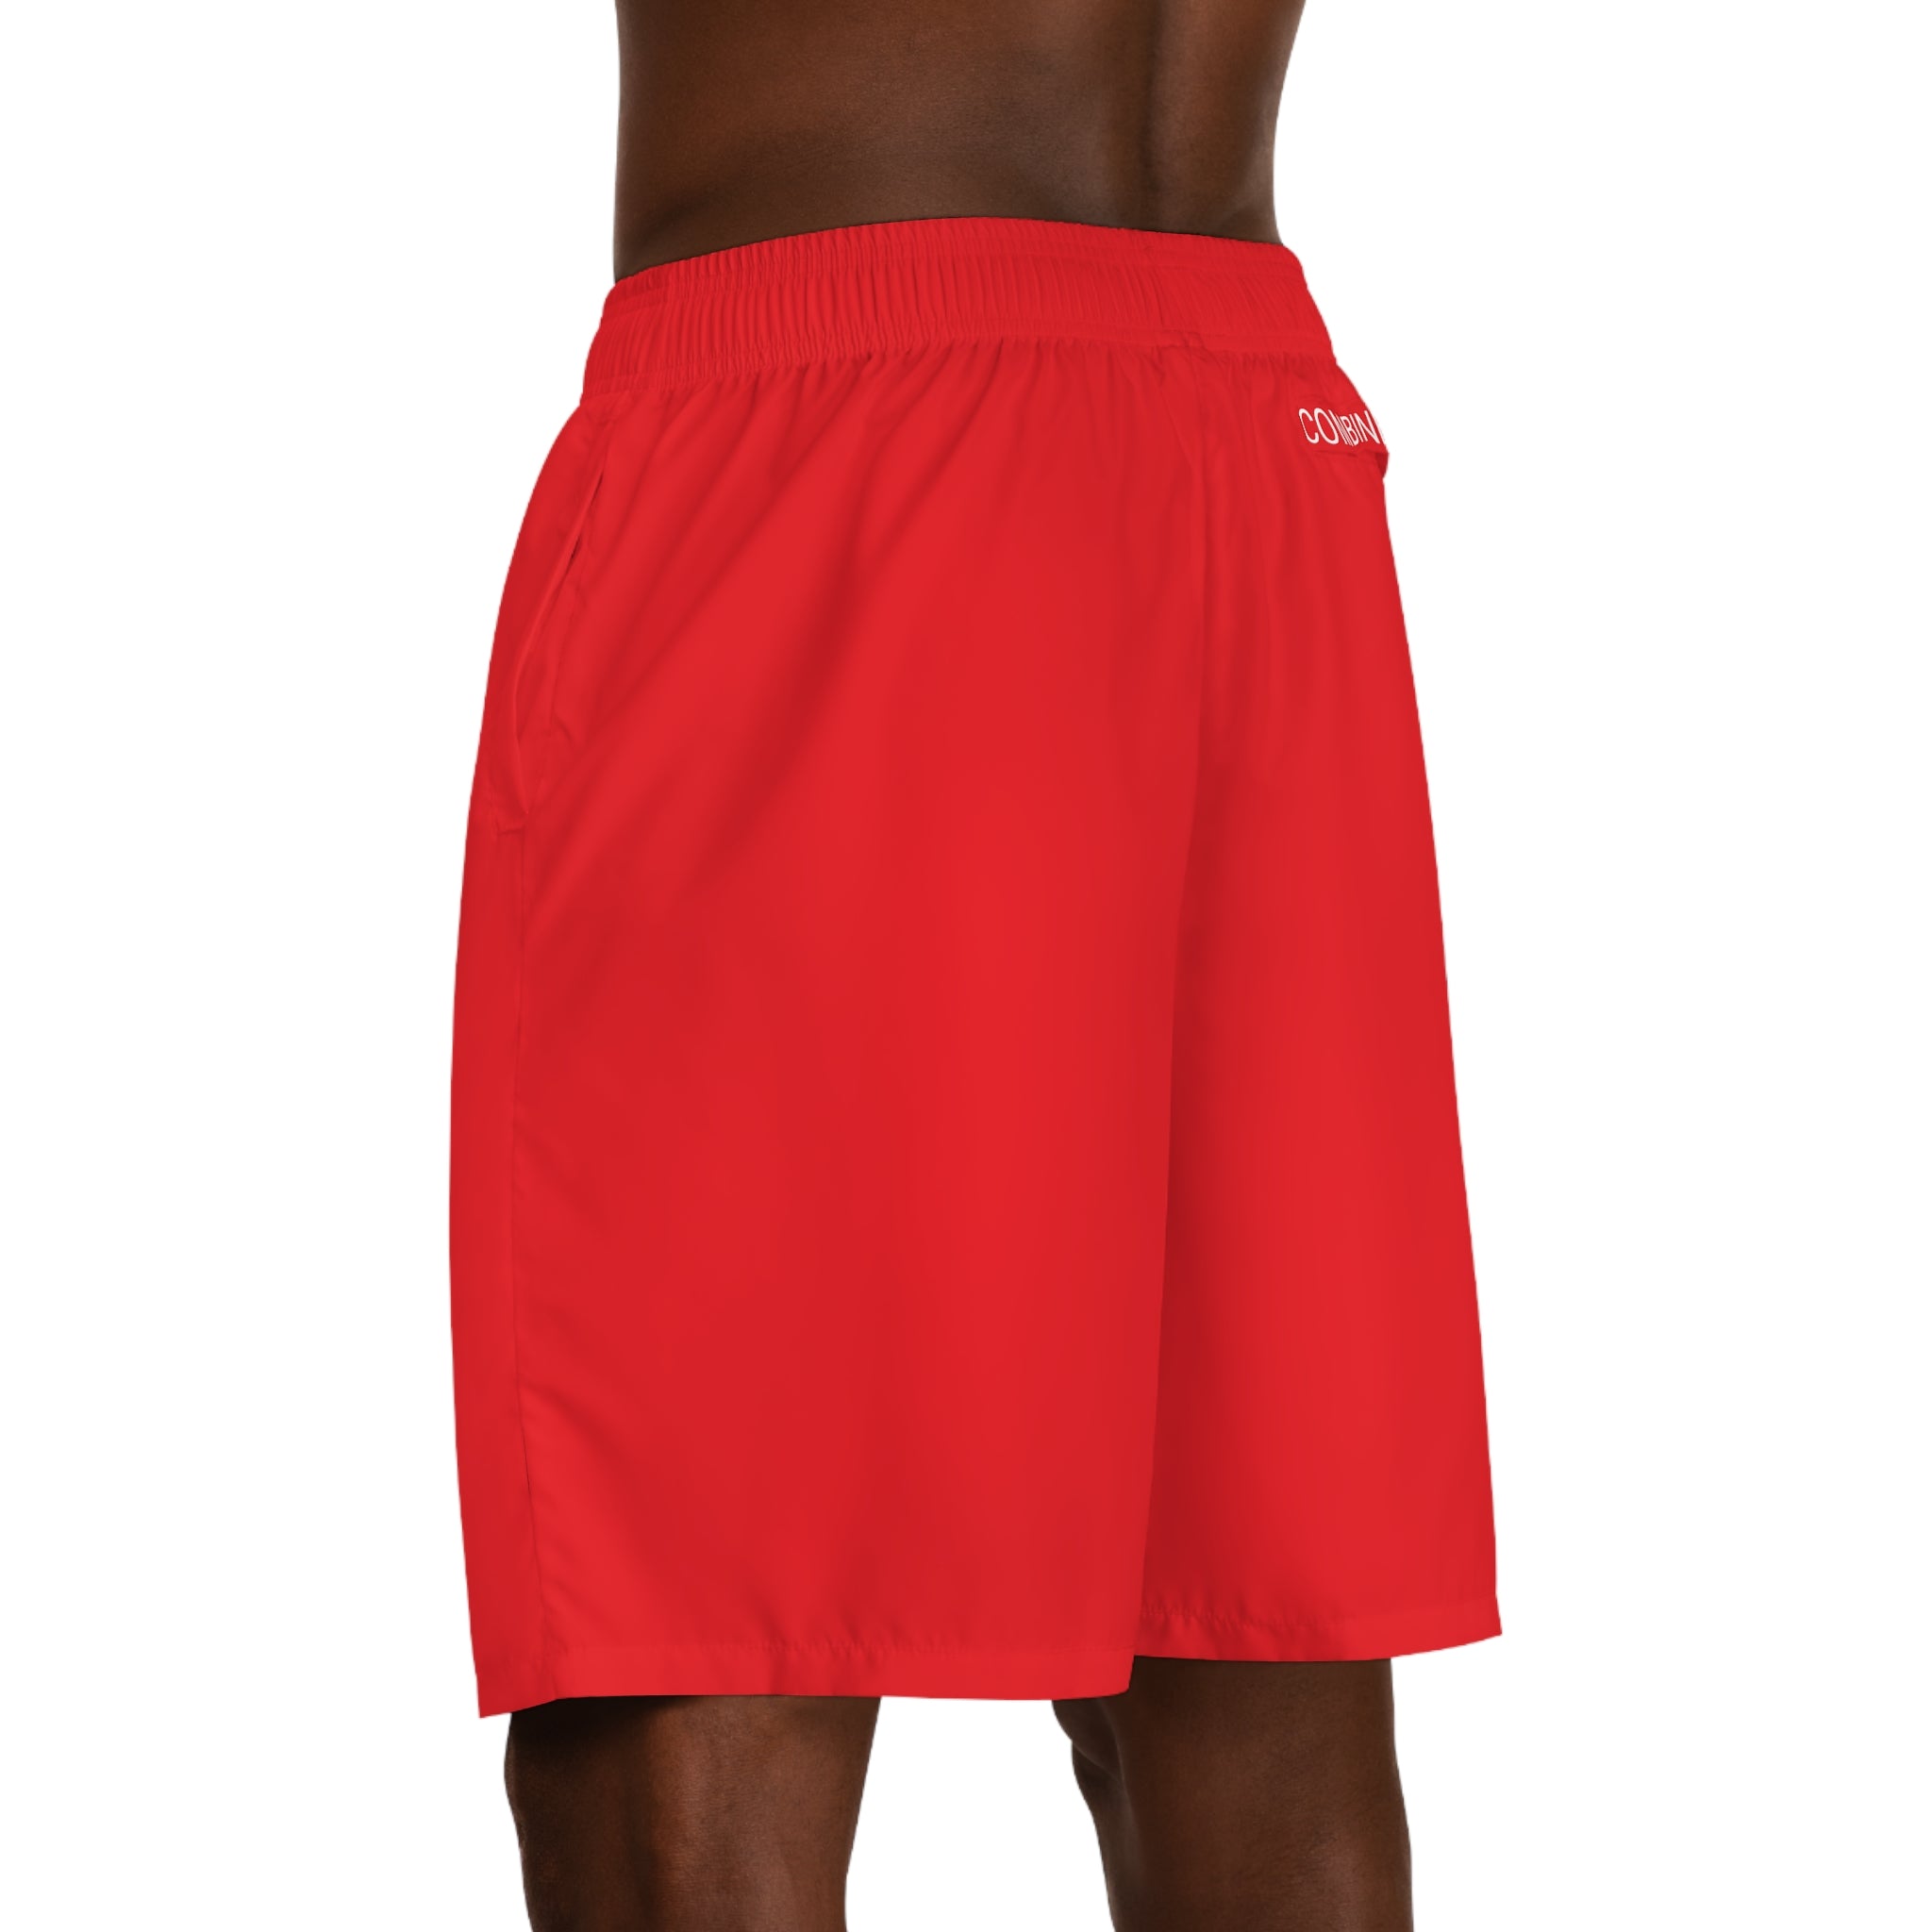 CombinedMinds Men's Jogger Shorts Red/White Logo